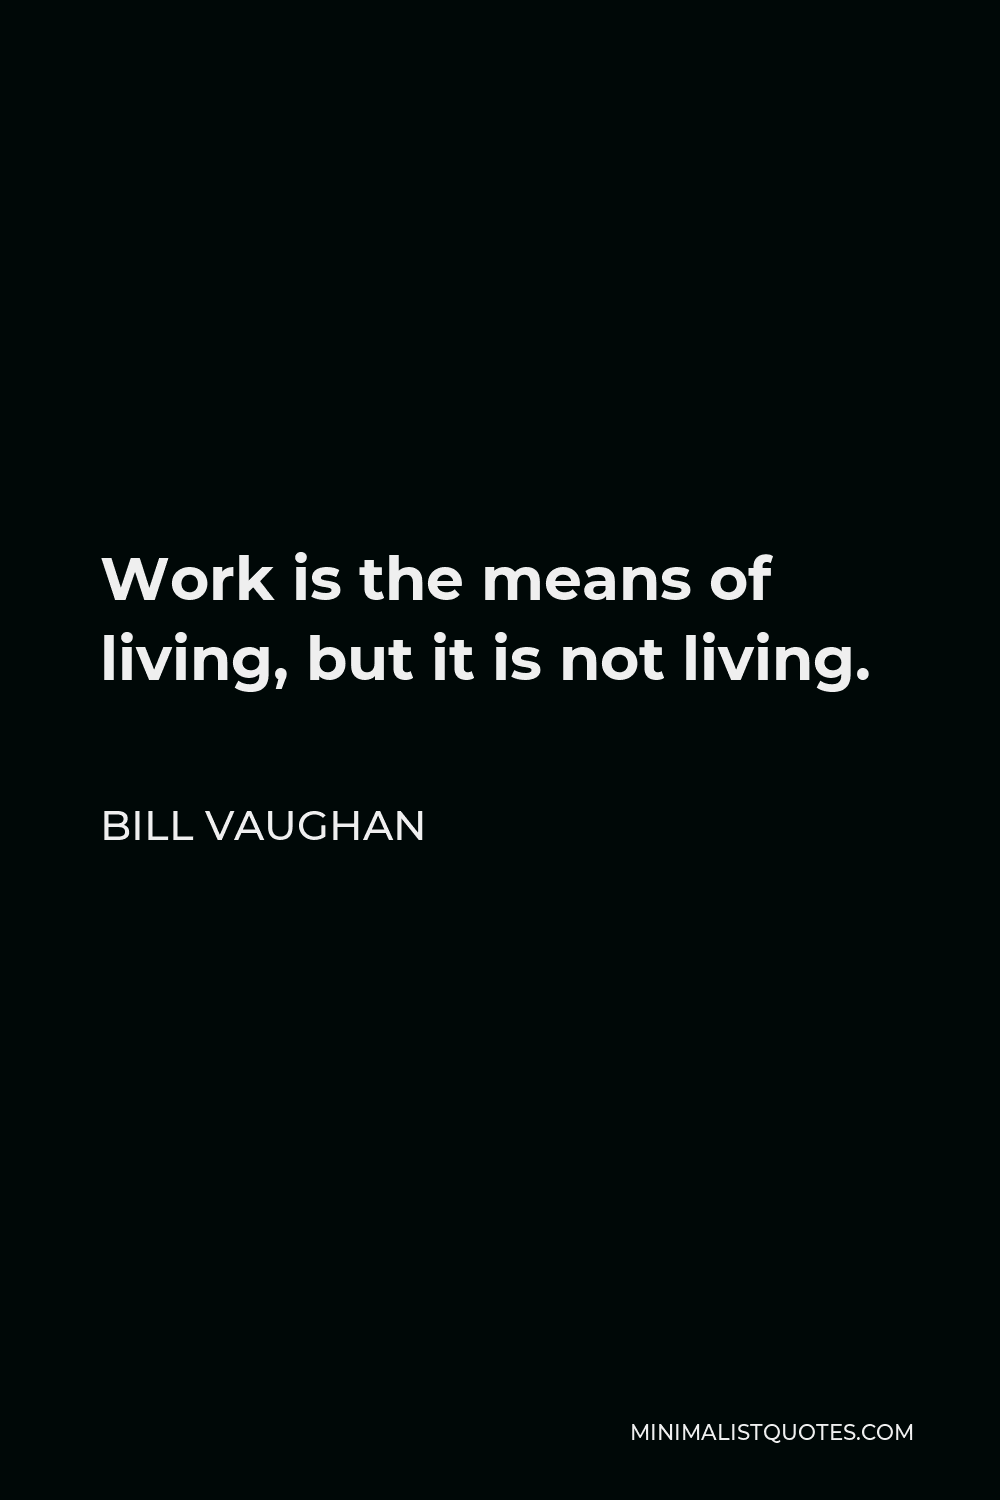 Bill Vaughan Quote - Work is the means of living, but it is not living.